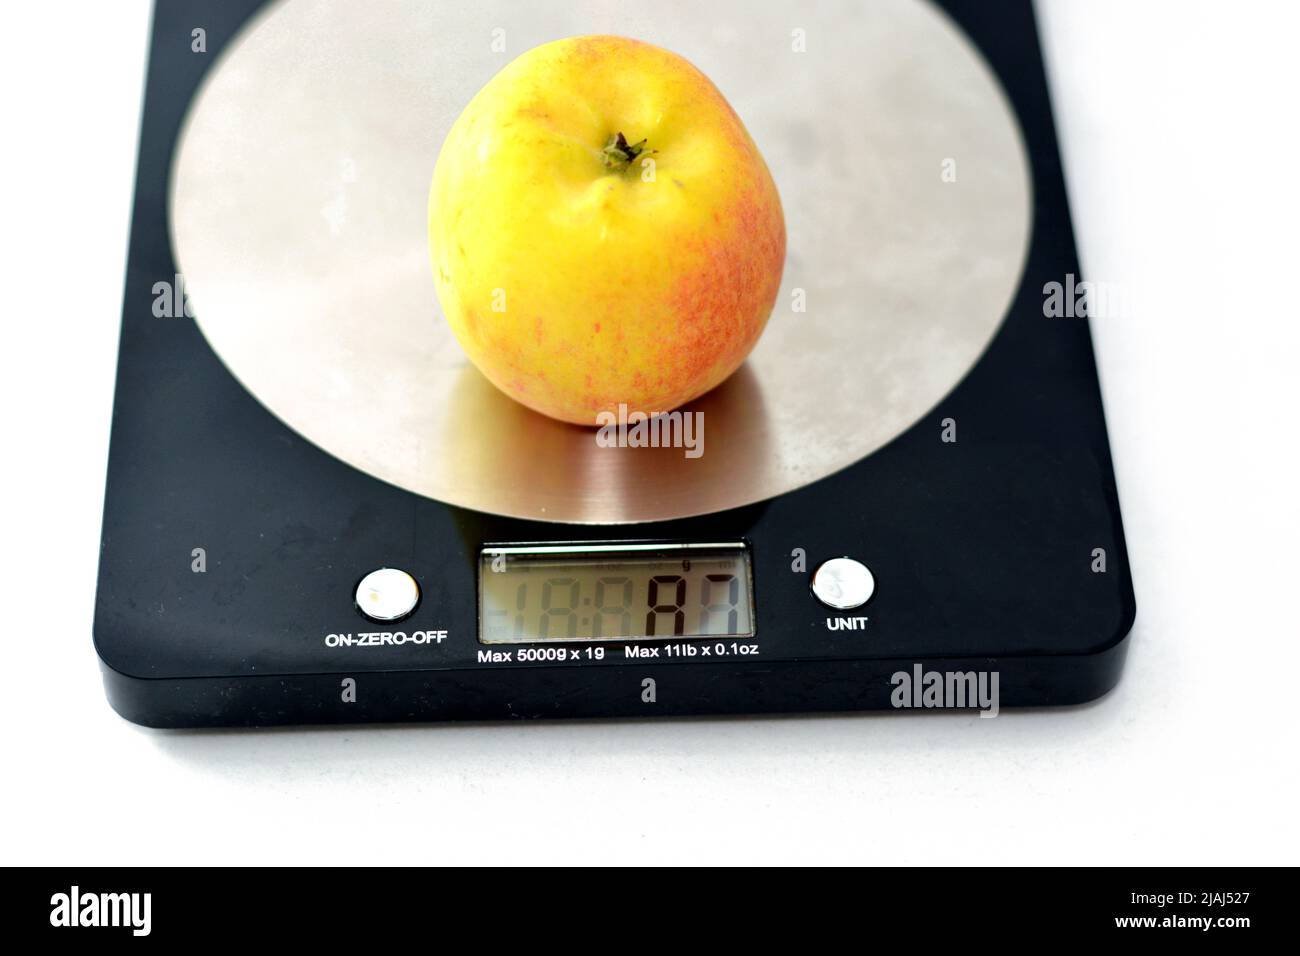 weight scales calories eating eat eats apple healthy health model design  Stock Photo - Alamy